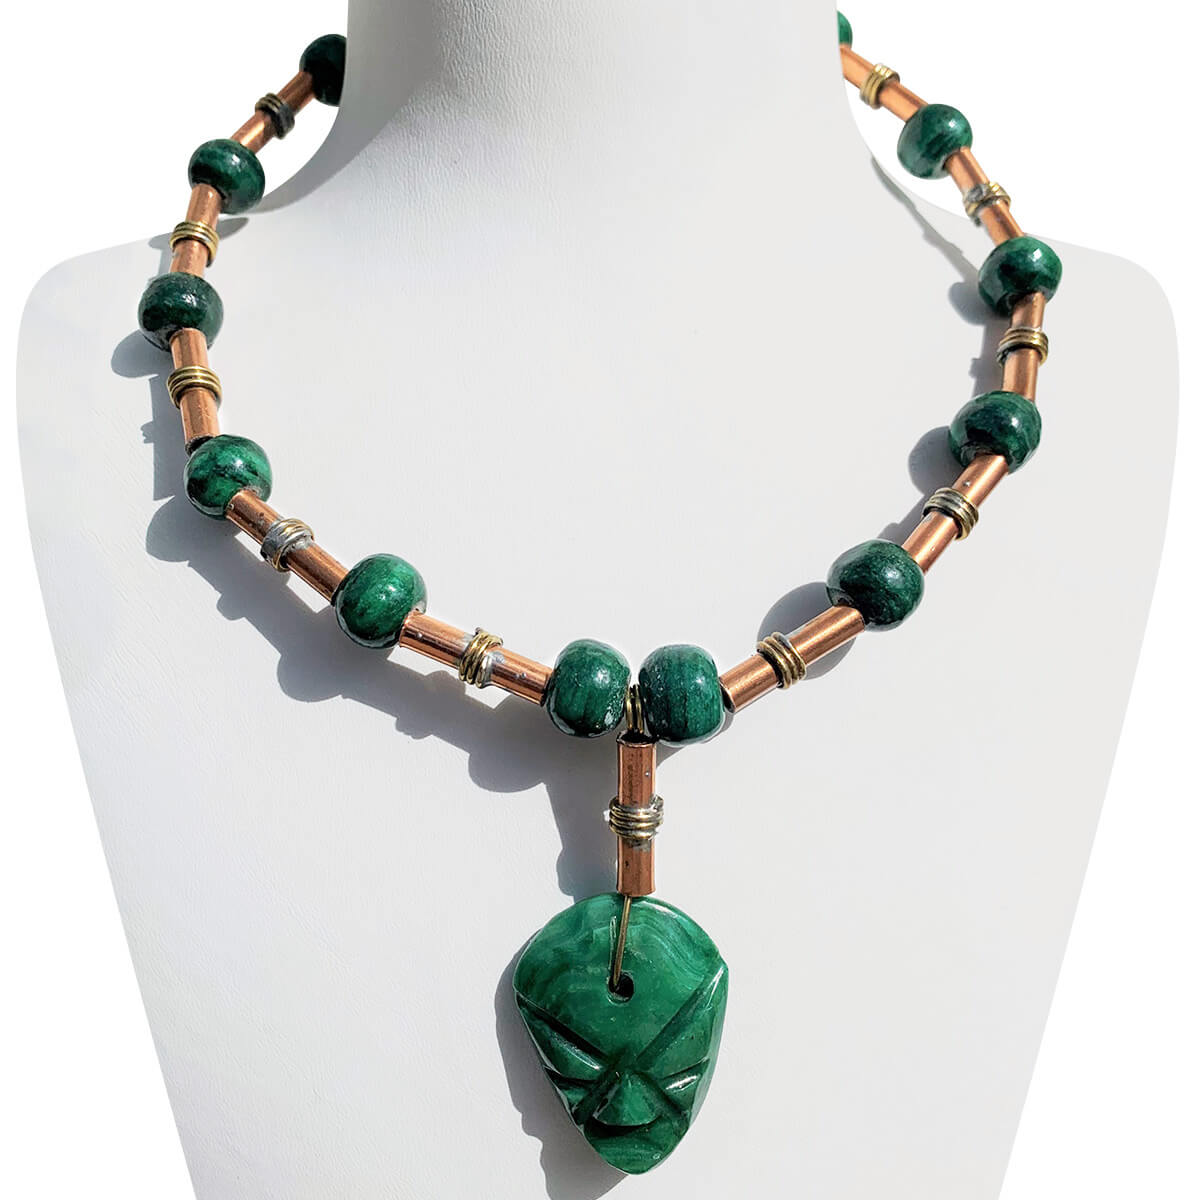 Mexican Laton Necklace in Green